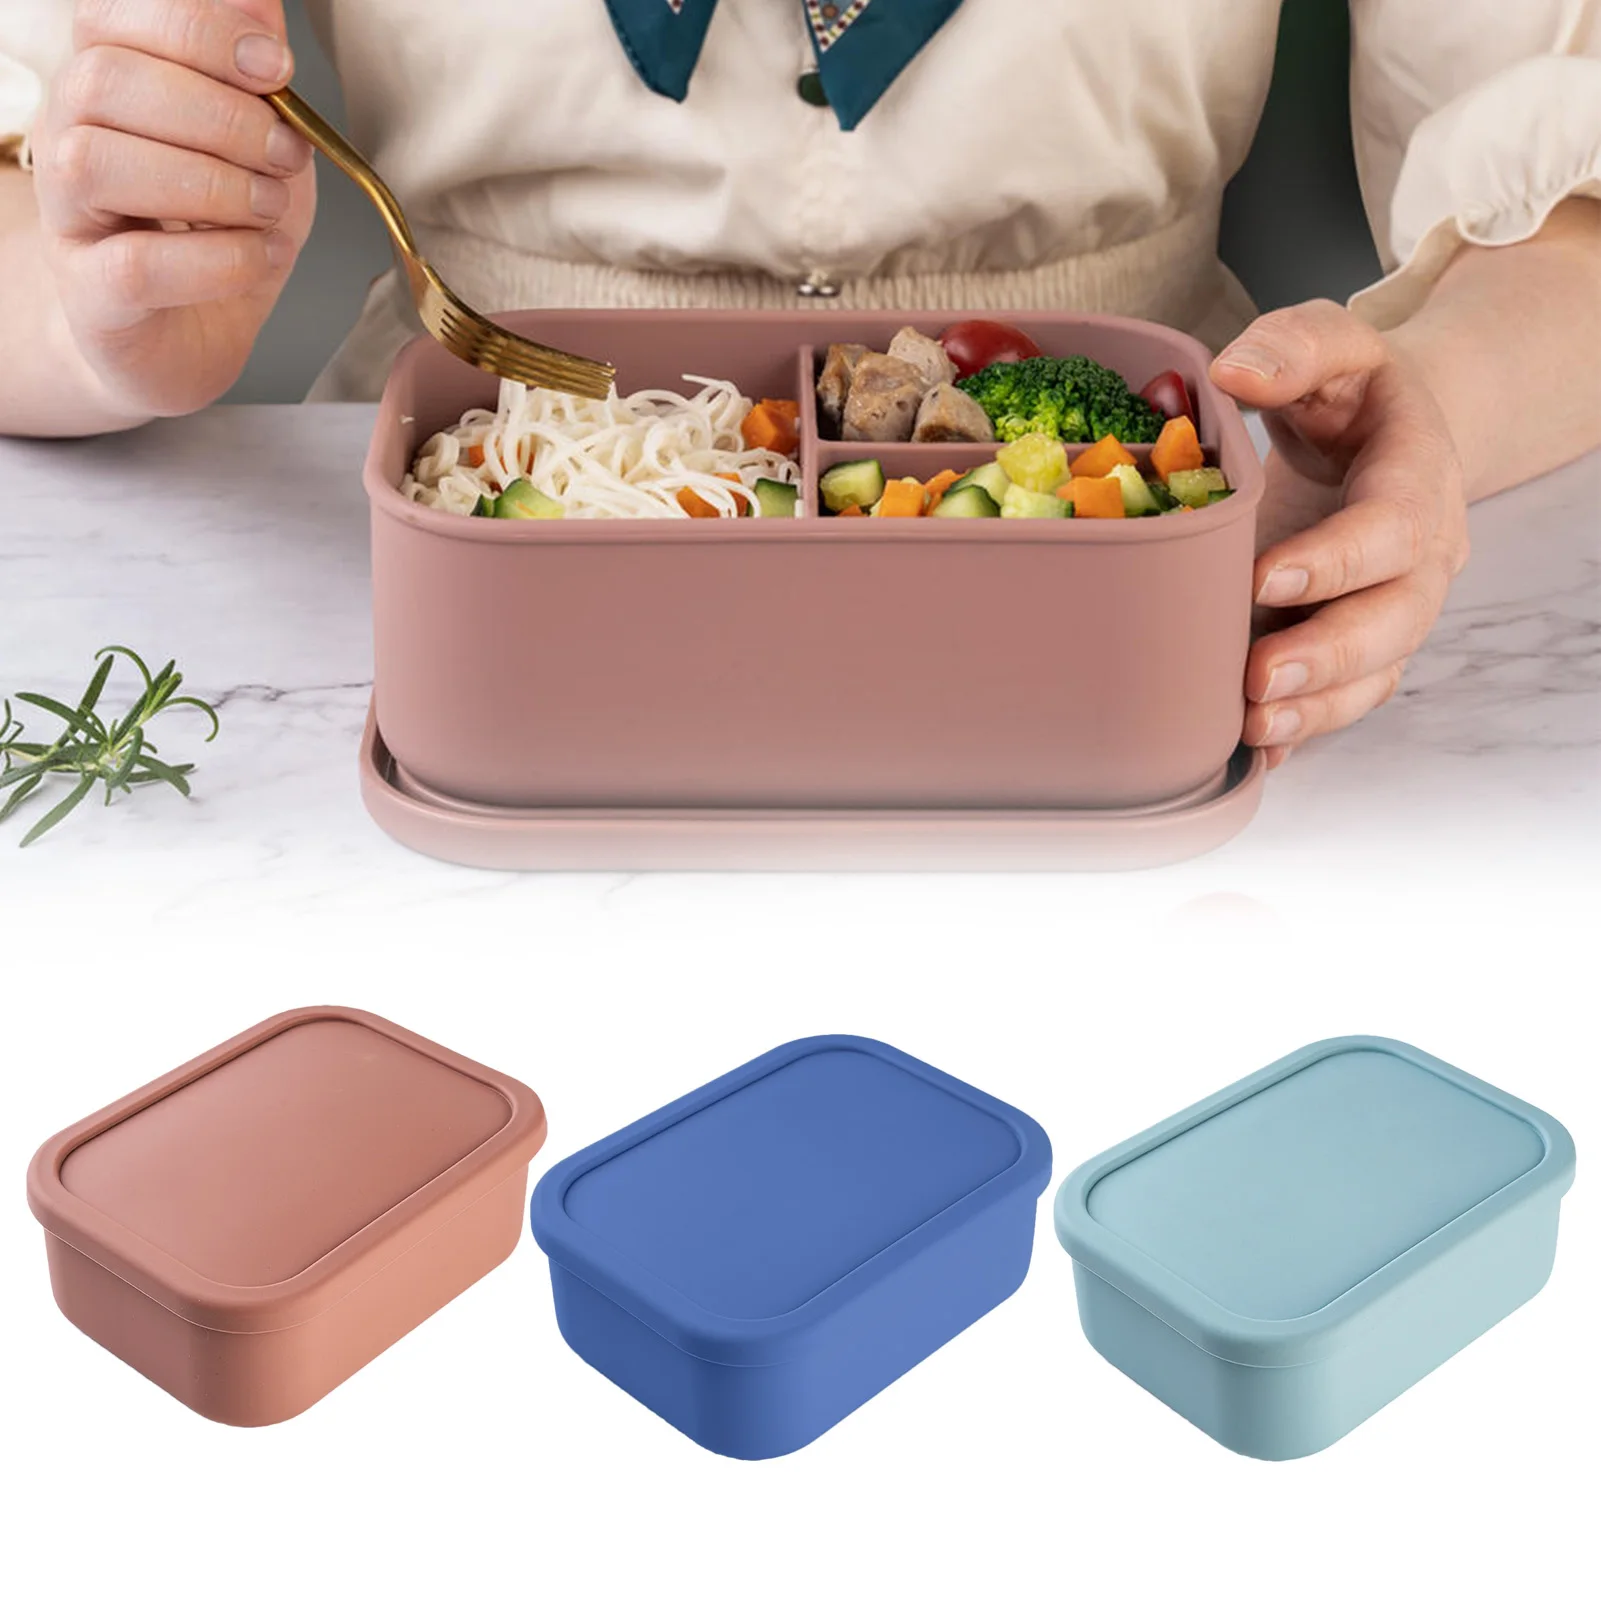 Silicone Bento Box Durable Lunch Box Containers With 3 Compartments Stackable Food Storage Container With Lid For Lunch Fruits